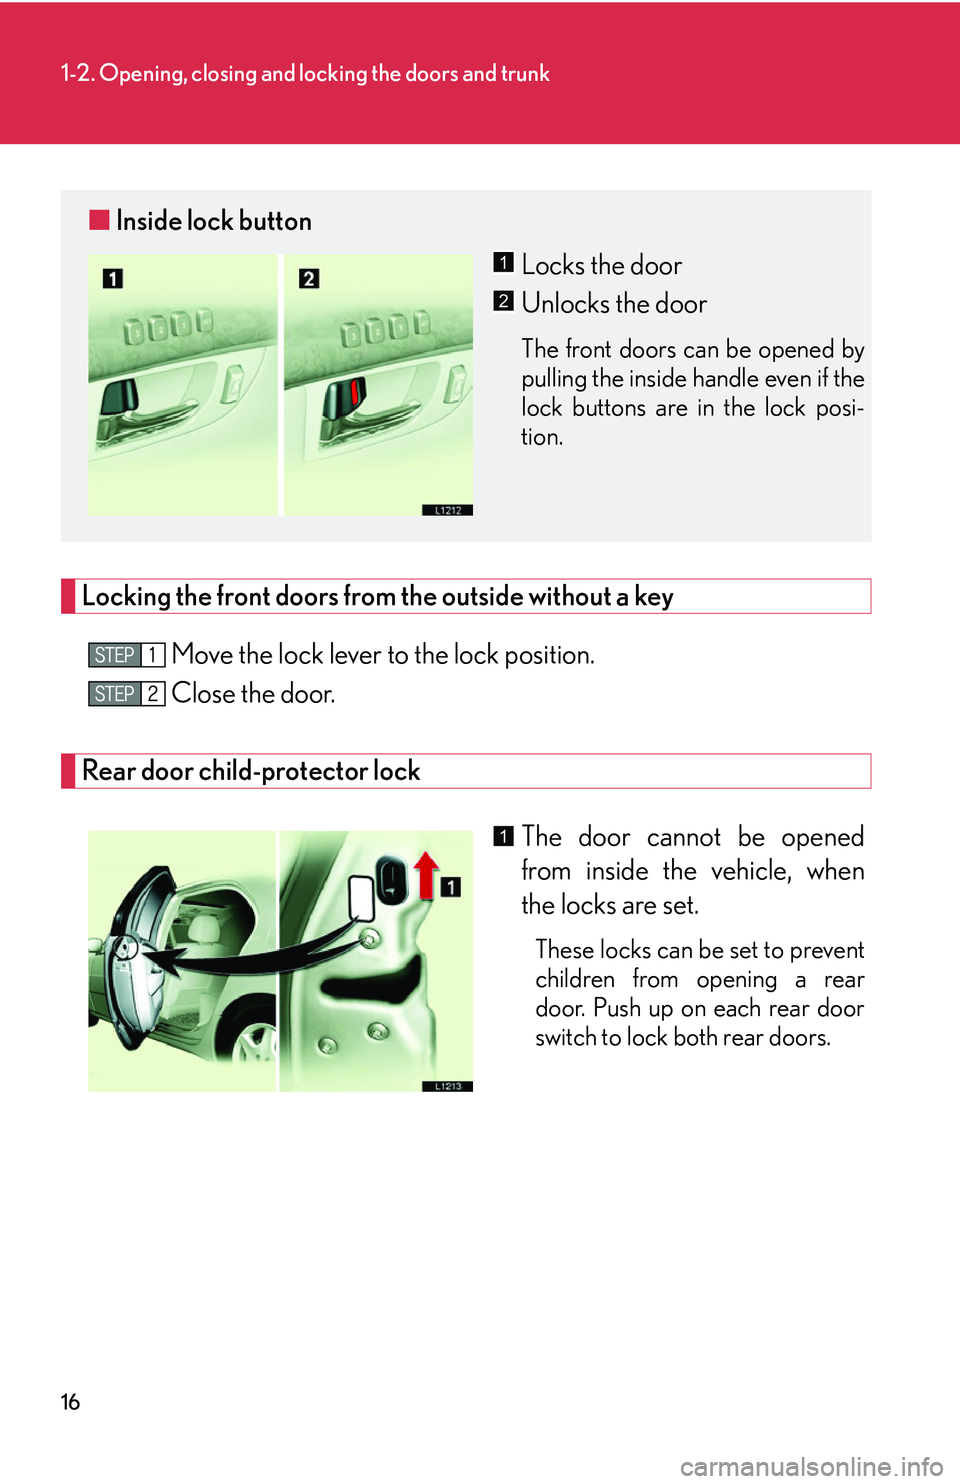 LEXUS LS430 2006 Owners Guide 16
1-2. Opening, closing and locking the doors and trunk
Locking the front doors from the outside without a key
Move the lock lever to the lock position.
Close the door.
Rear door child-protector lock